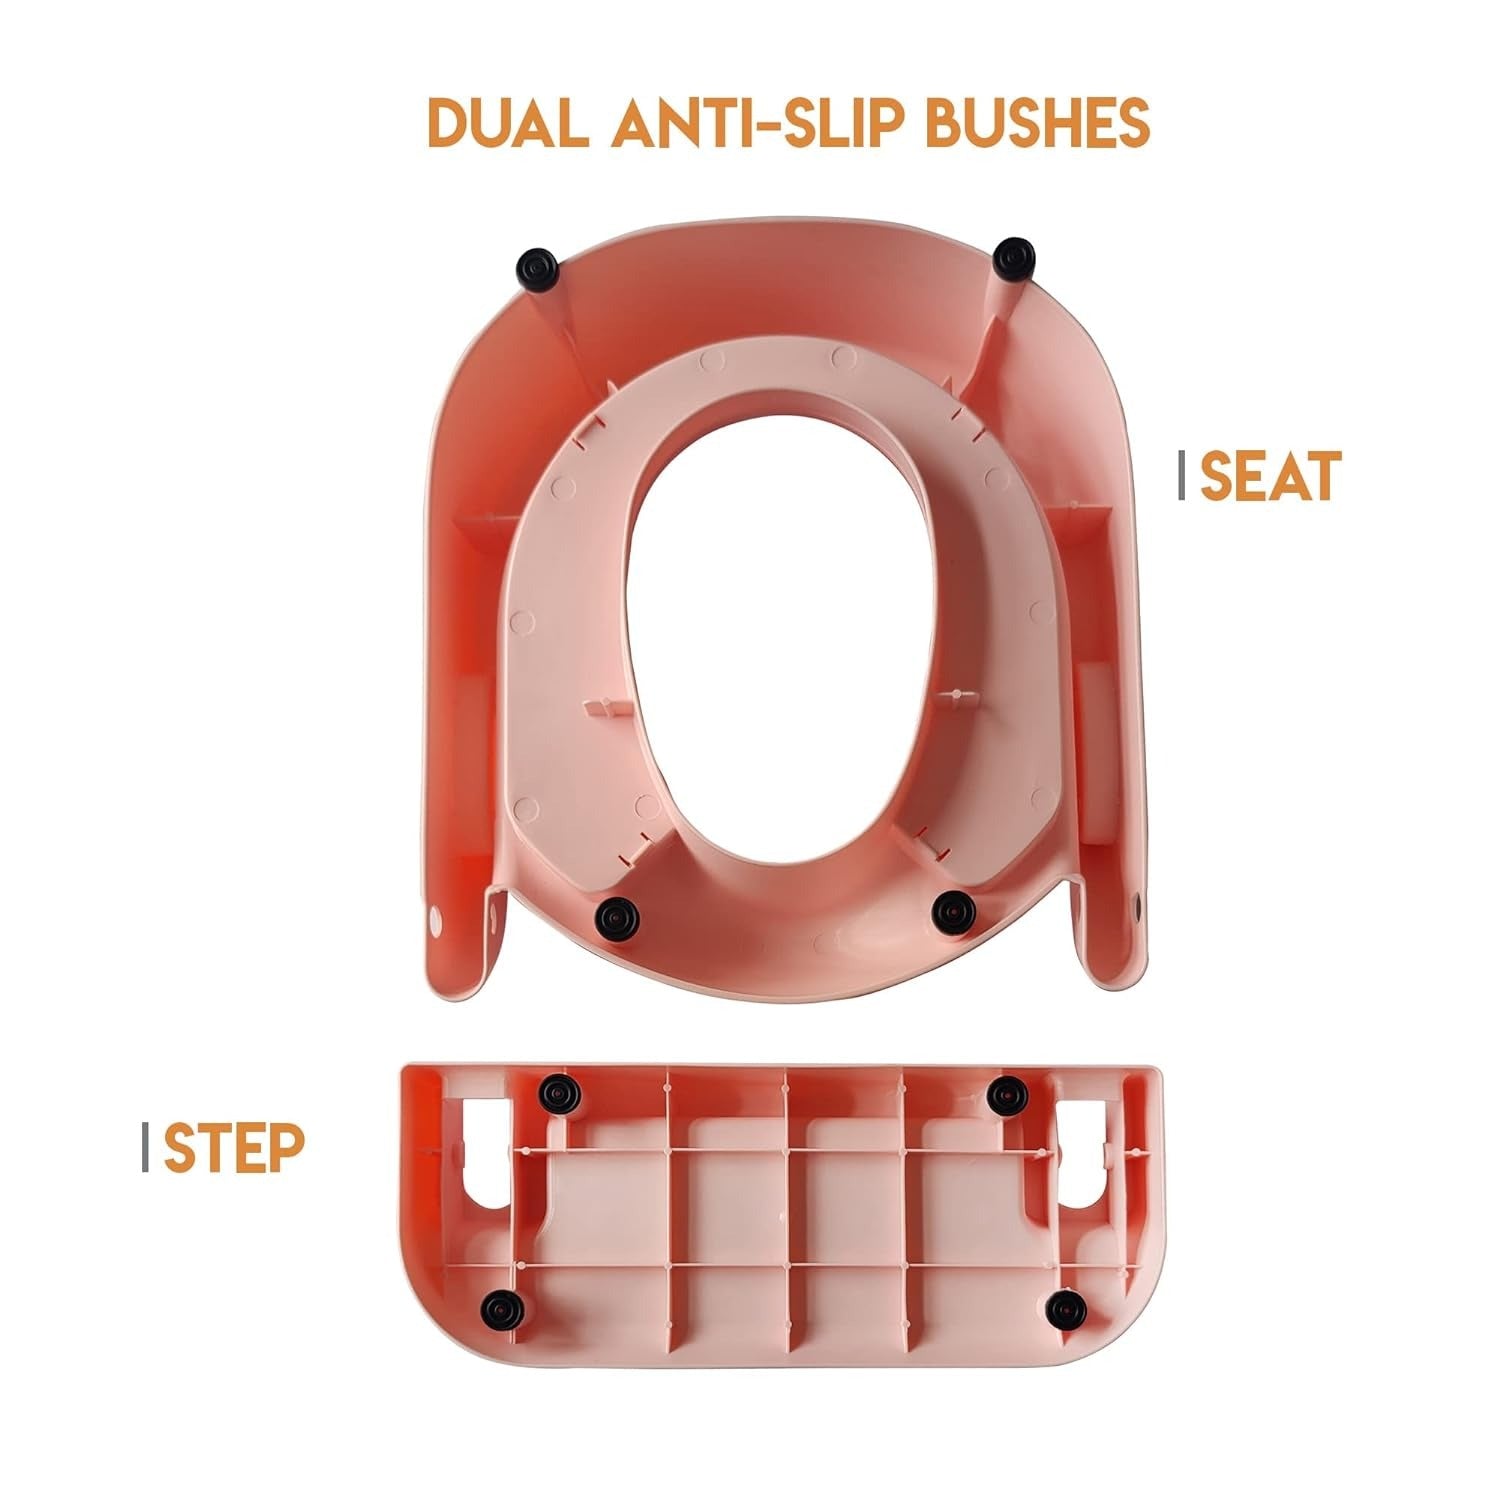 feature of Toilet Potty Trainer Seat 